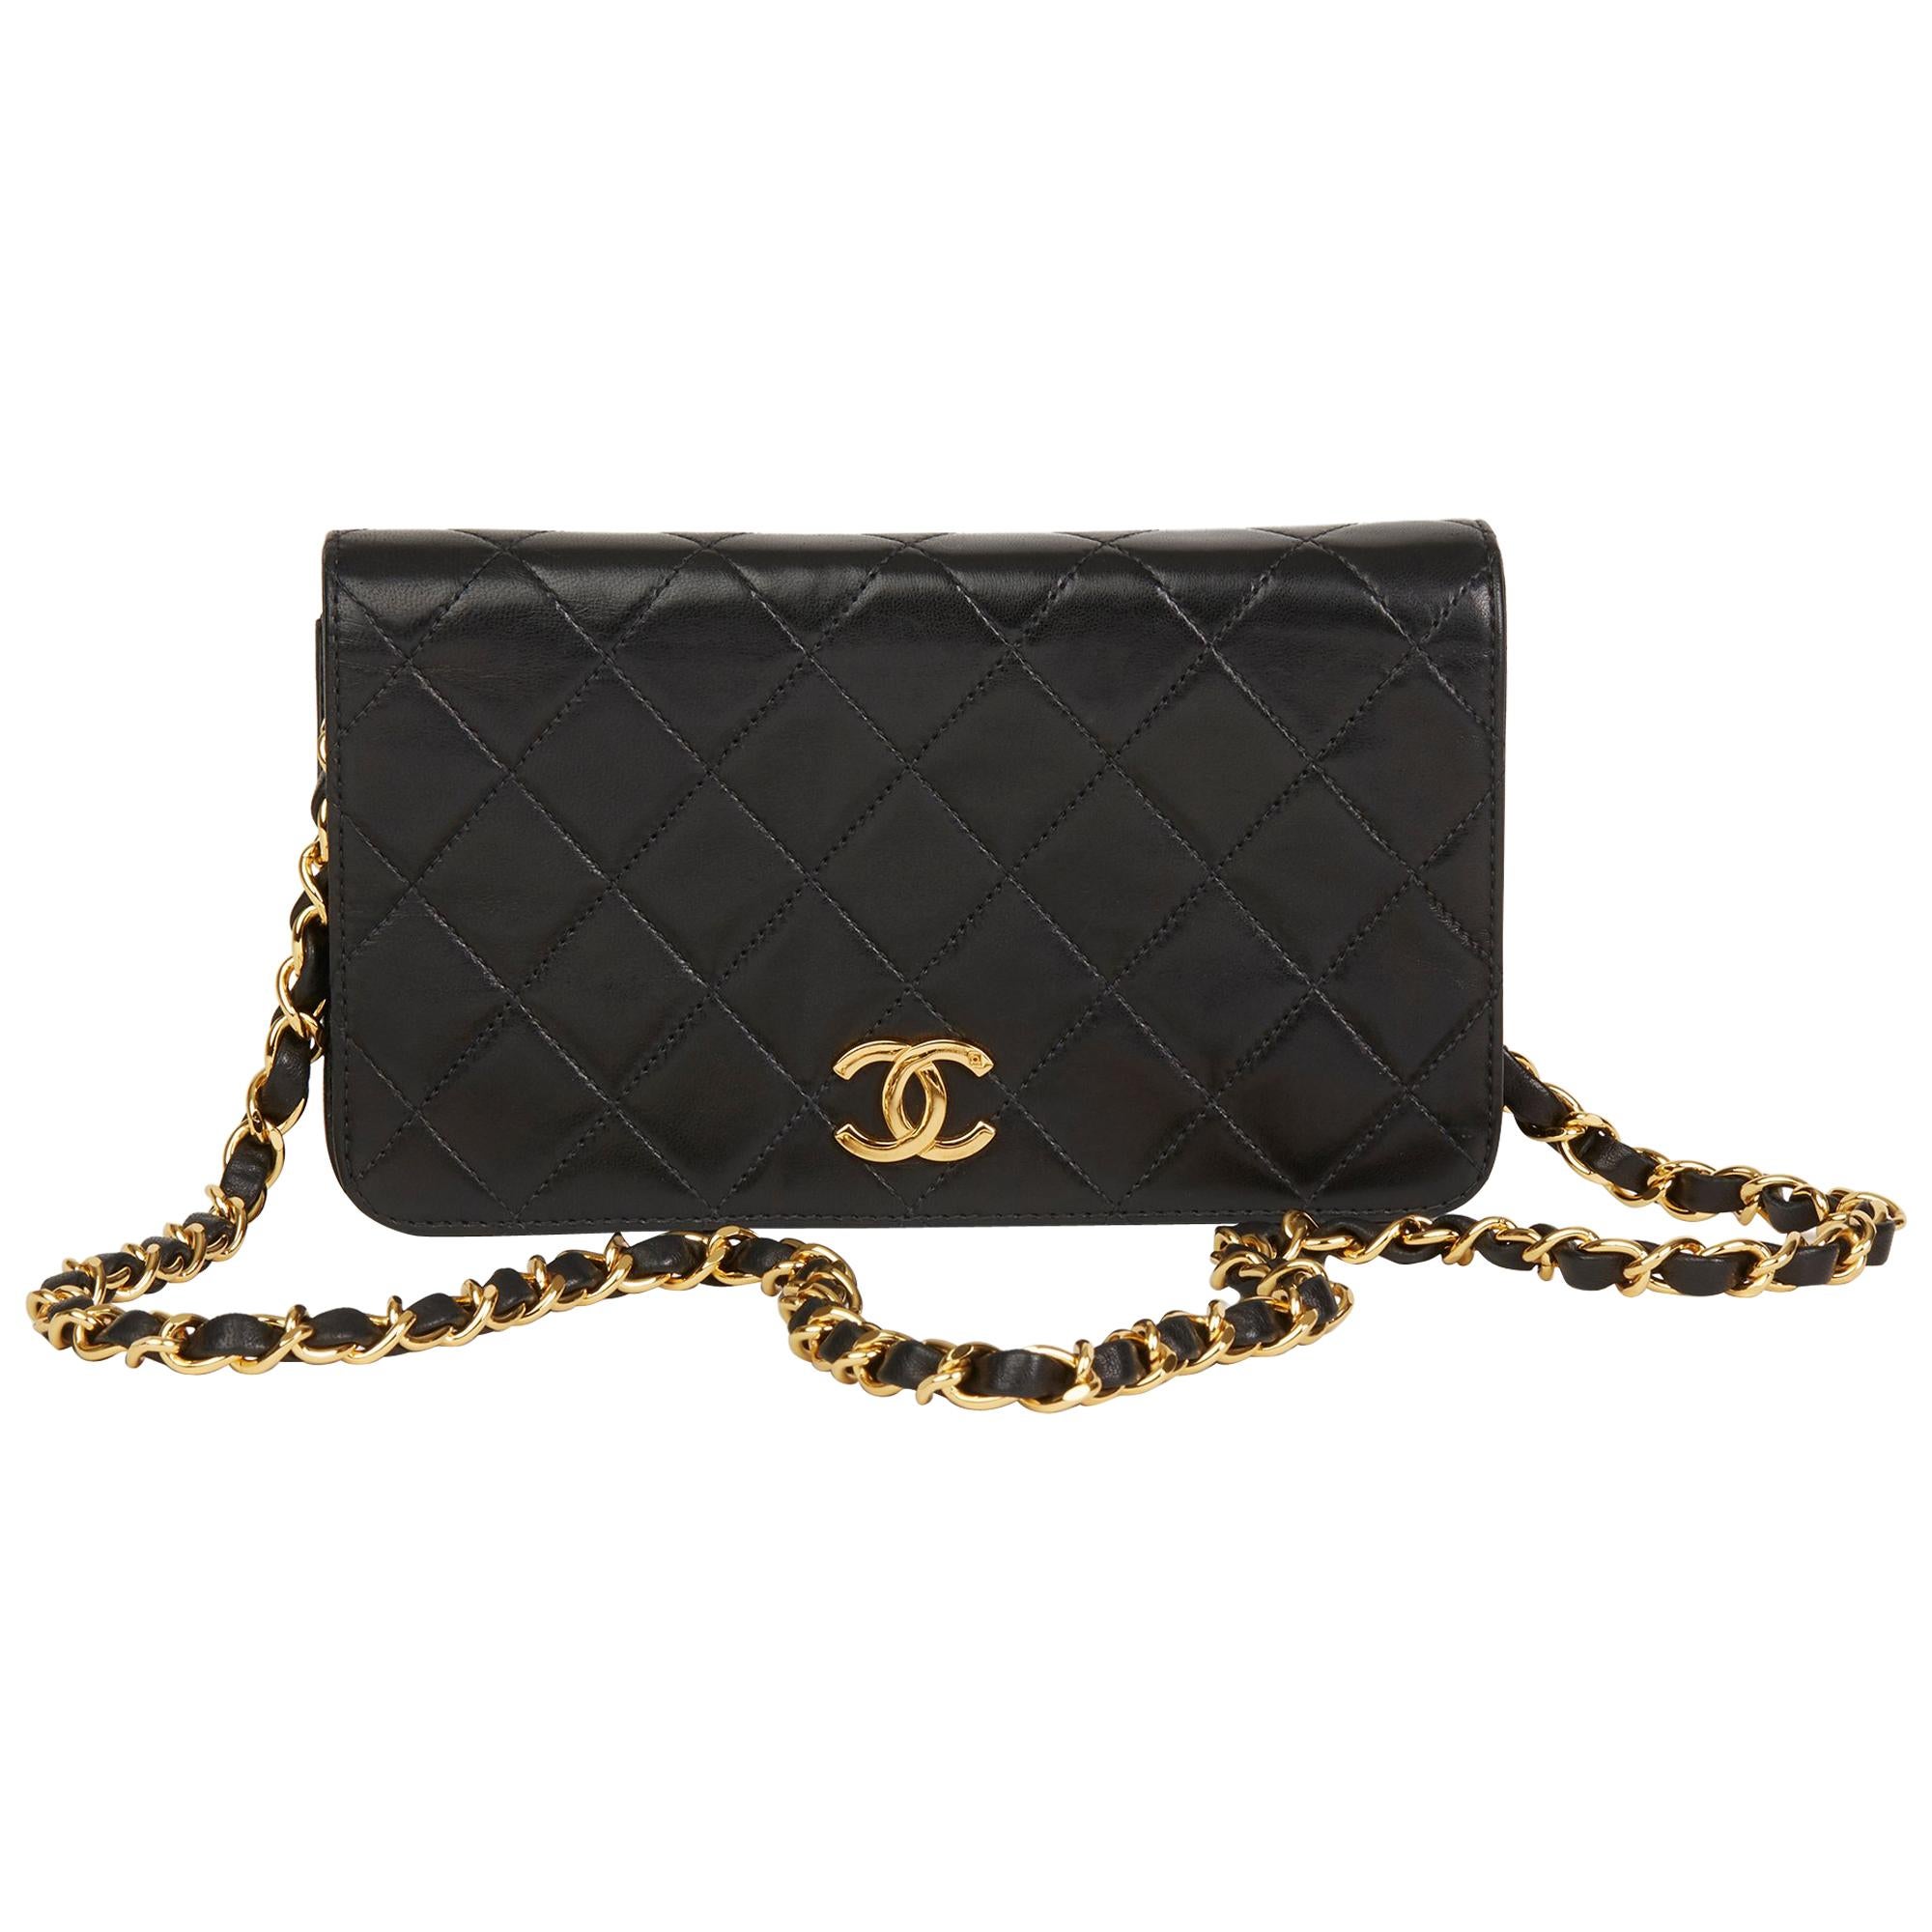 1996 Chanel Black Quilted Lambskin Vintage Small Classic Full Flap Bag